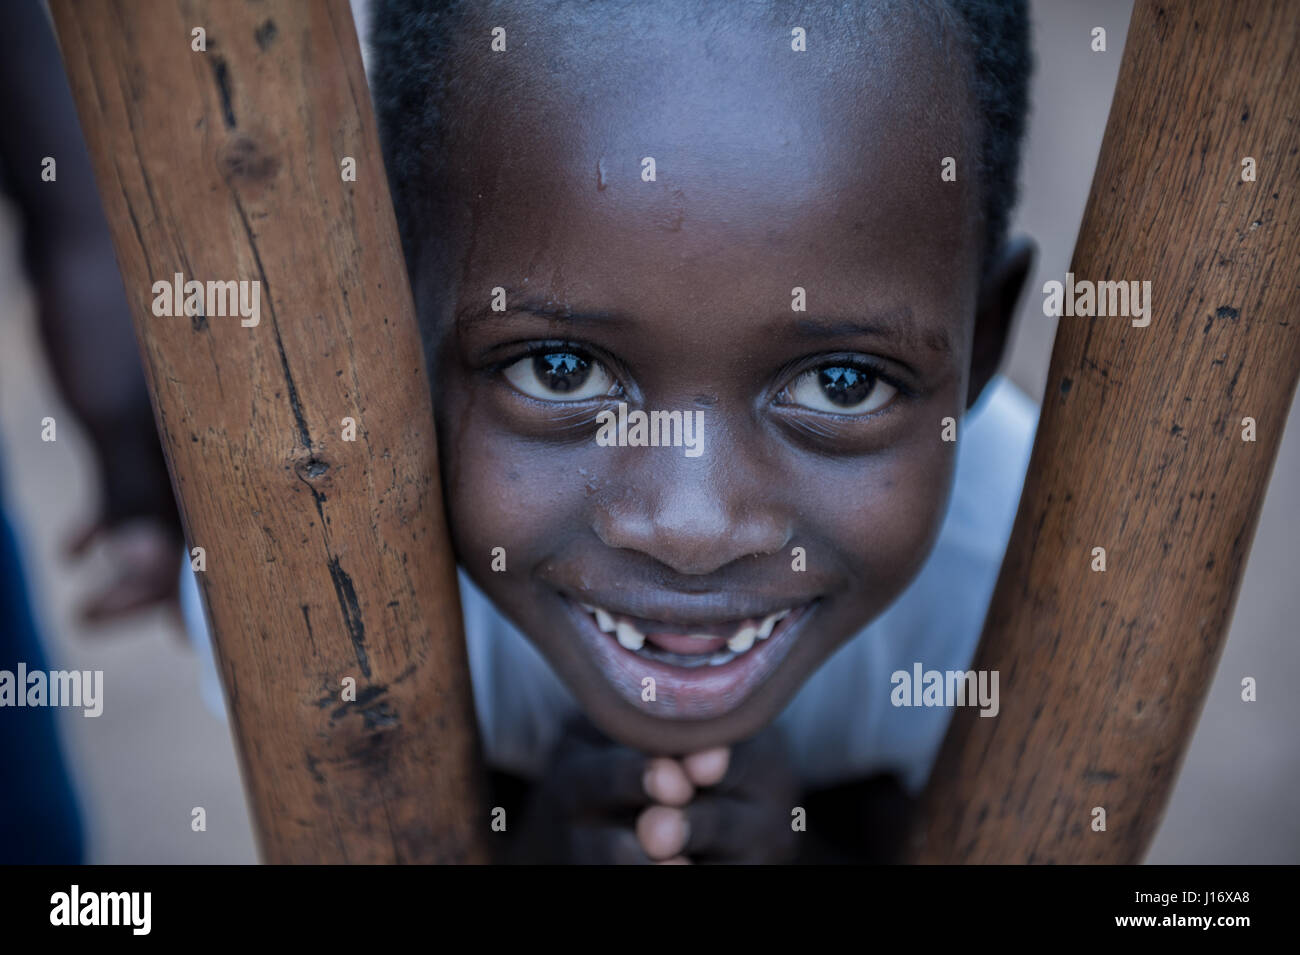 A child looking through the poles of a mortar and pestle in Dungu, north east Democratic Republic of Congo Stock Photo